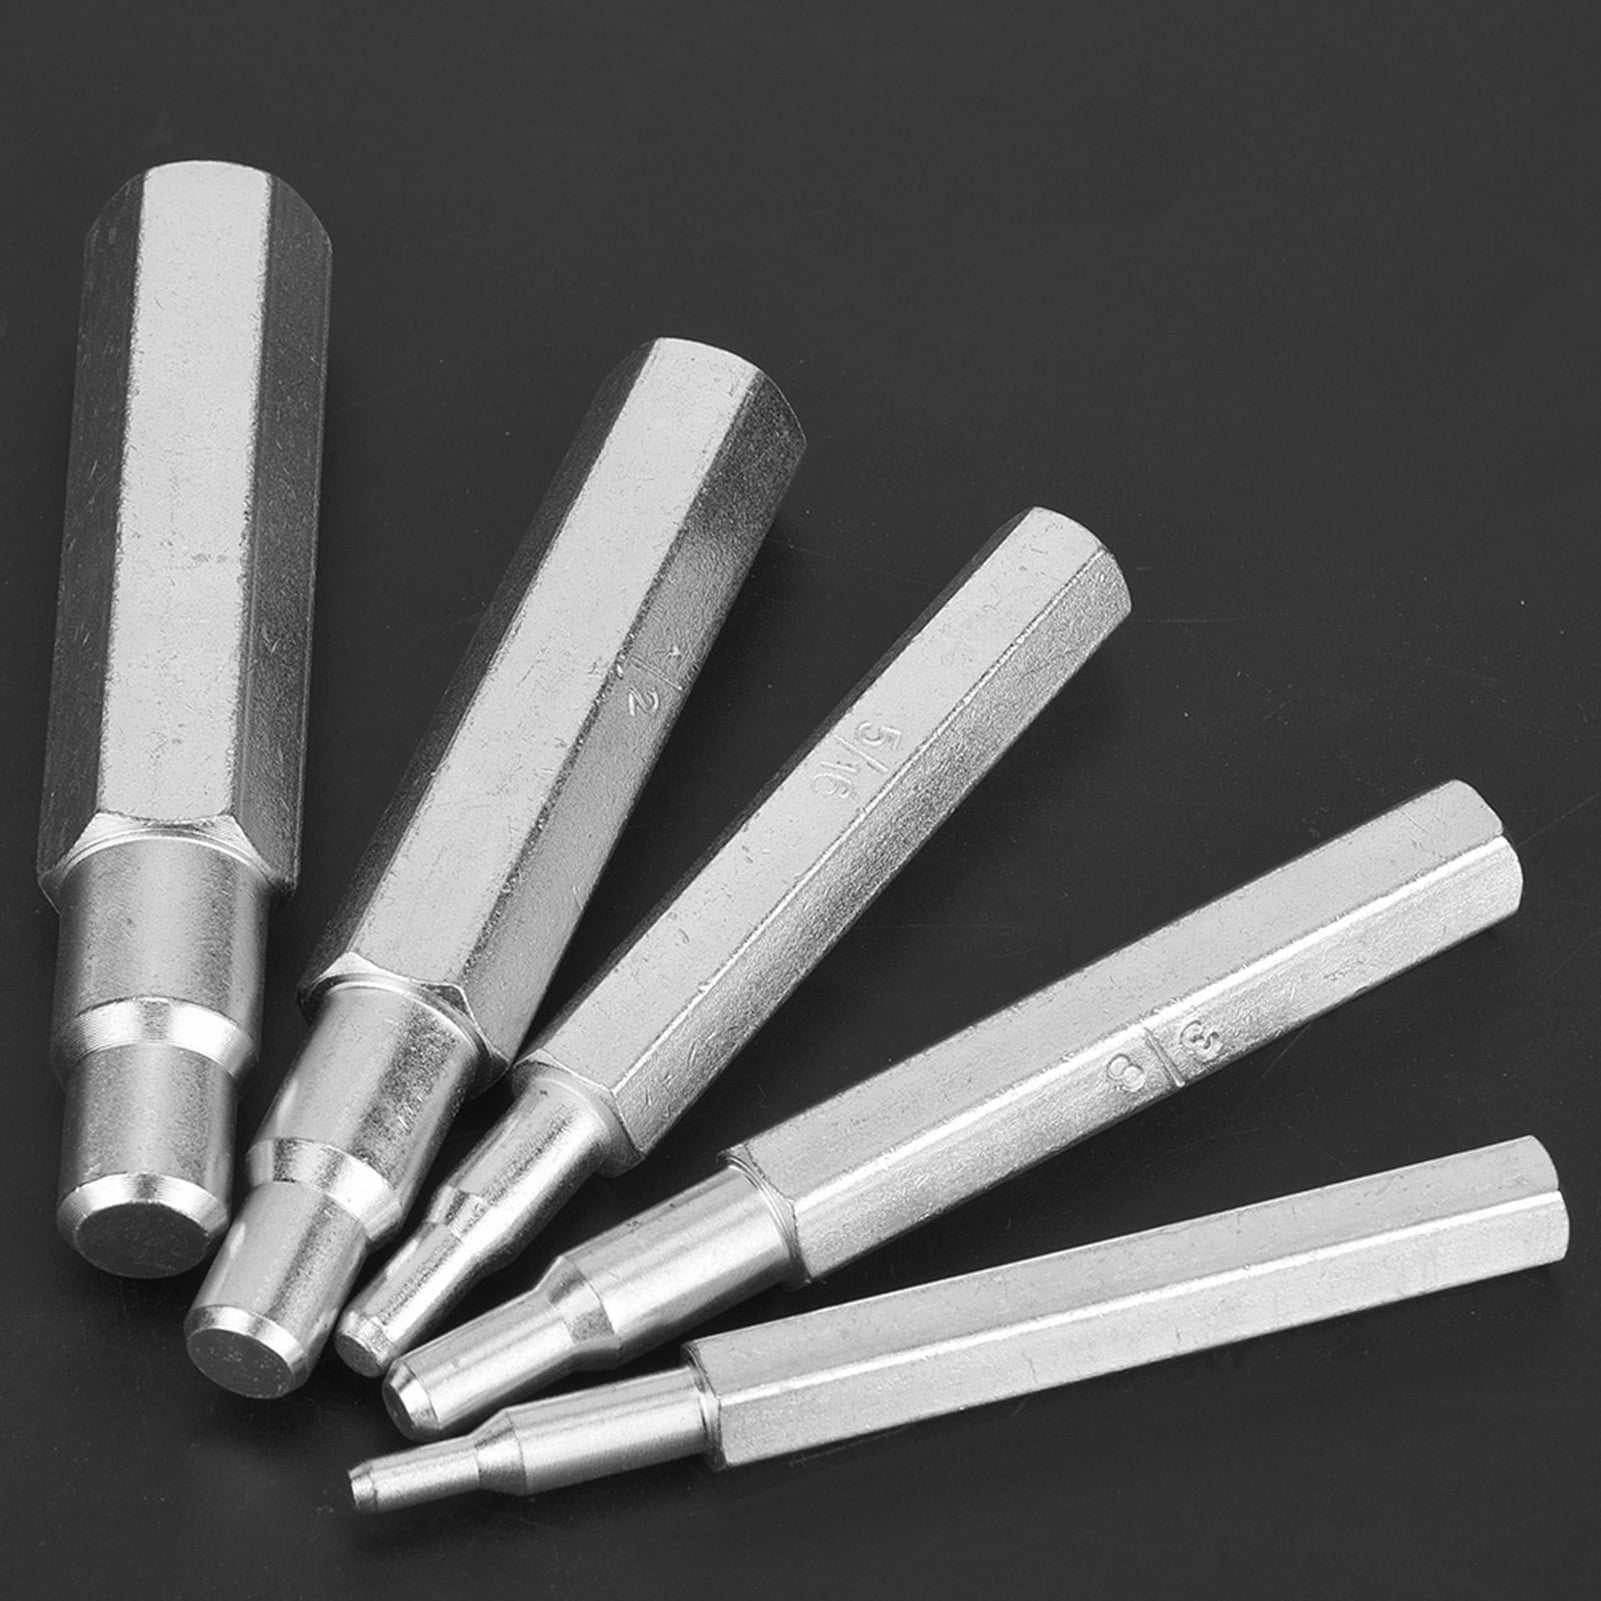 5pcs CT-193 Imperial Punch Type Swaging Tool Model 1/4",5/16",3/8",1/2",5/8" 